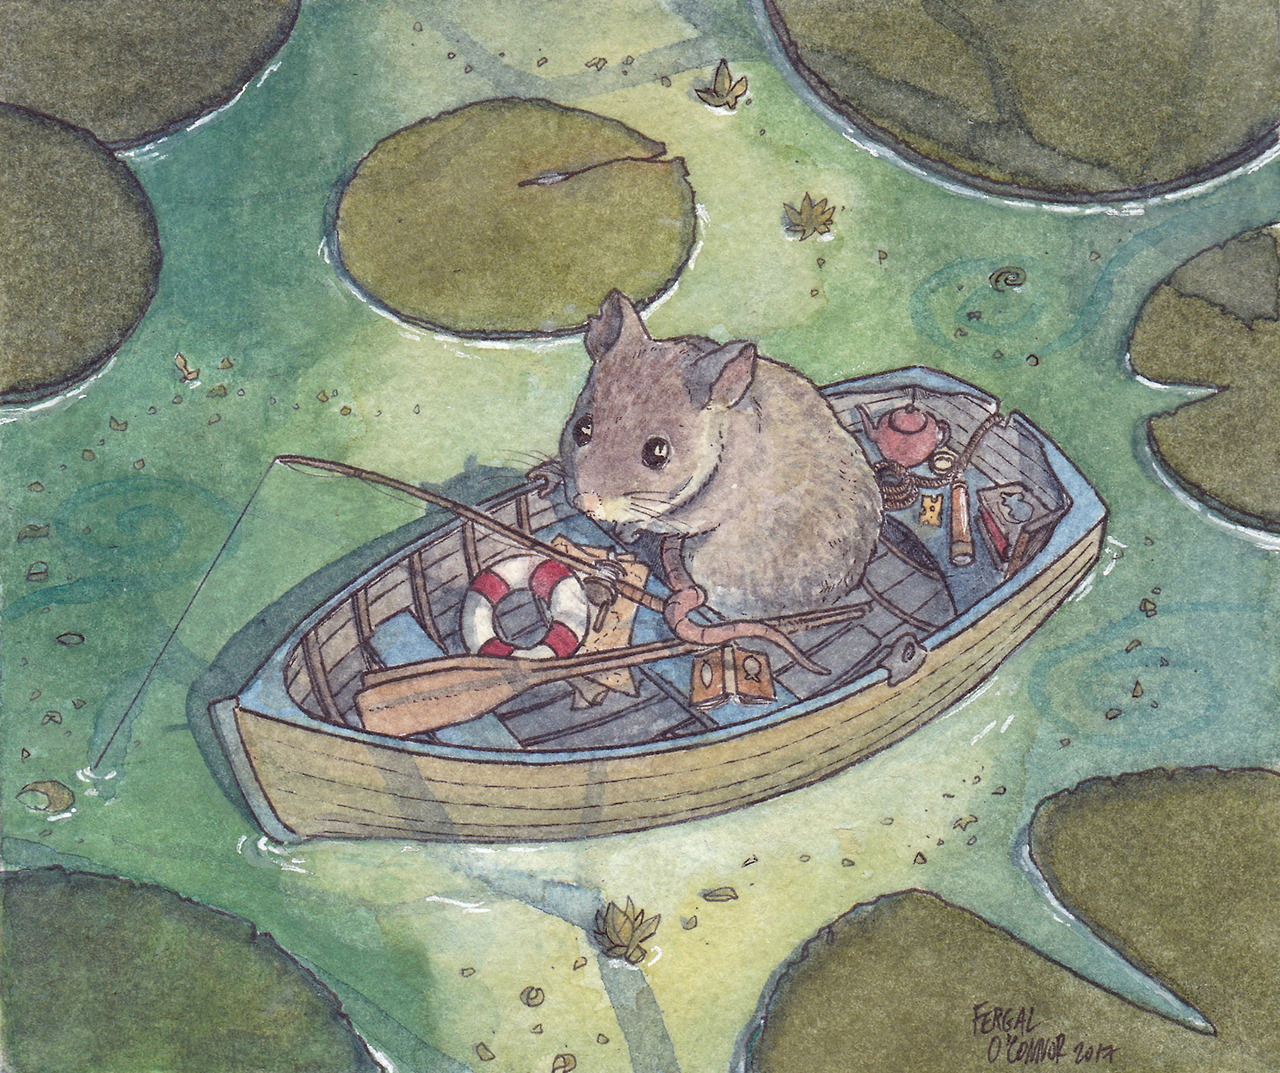 ‘Fishing Mouse’, 5x6", watercolours, gouache & fineliner. By Fergal O’ Connor